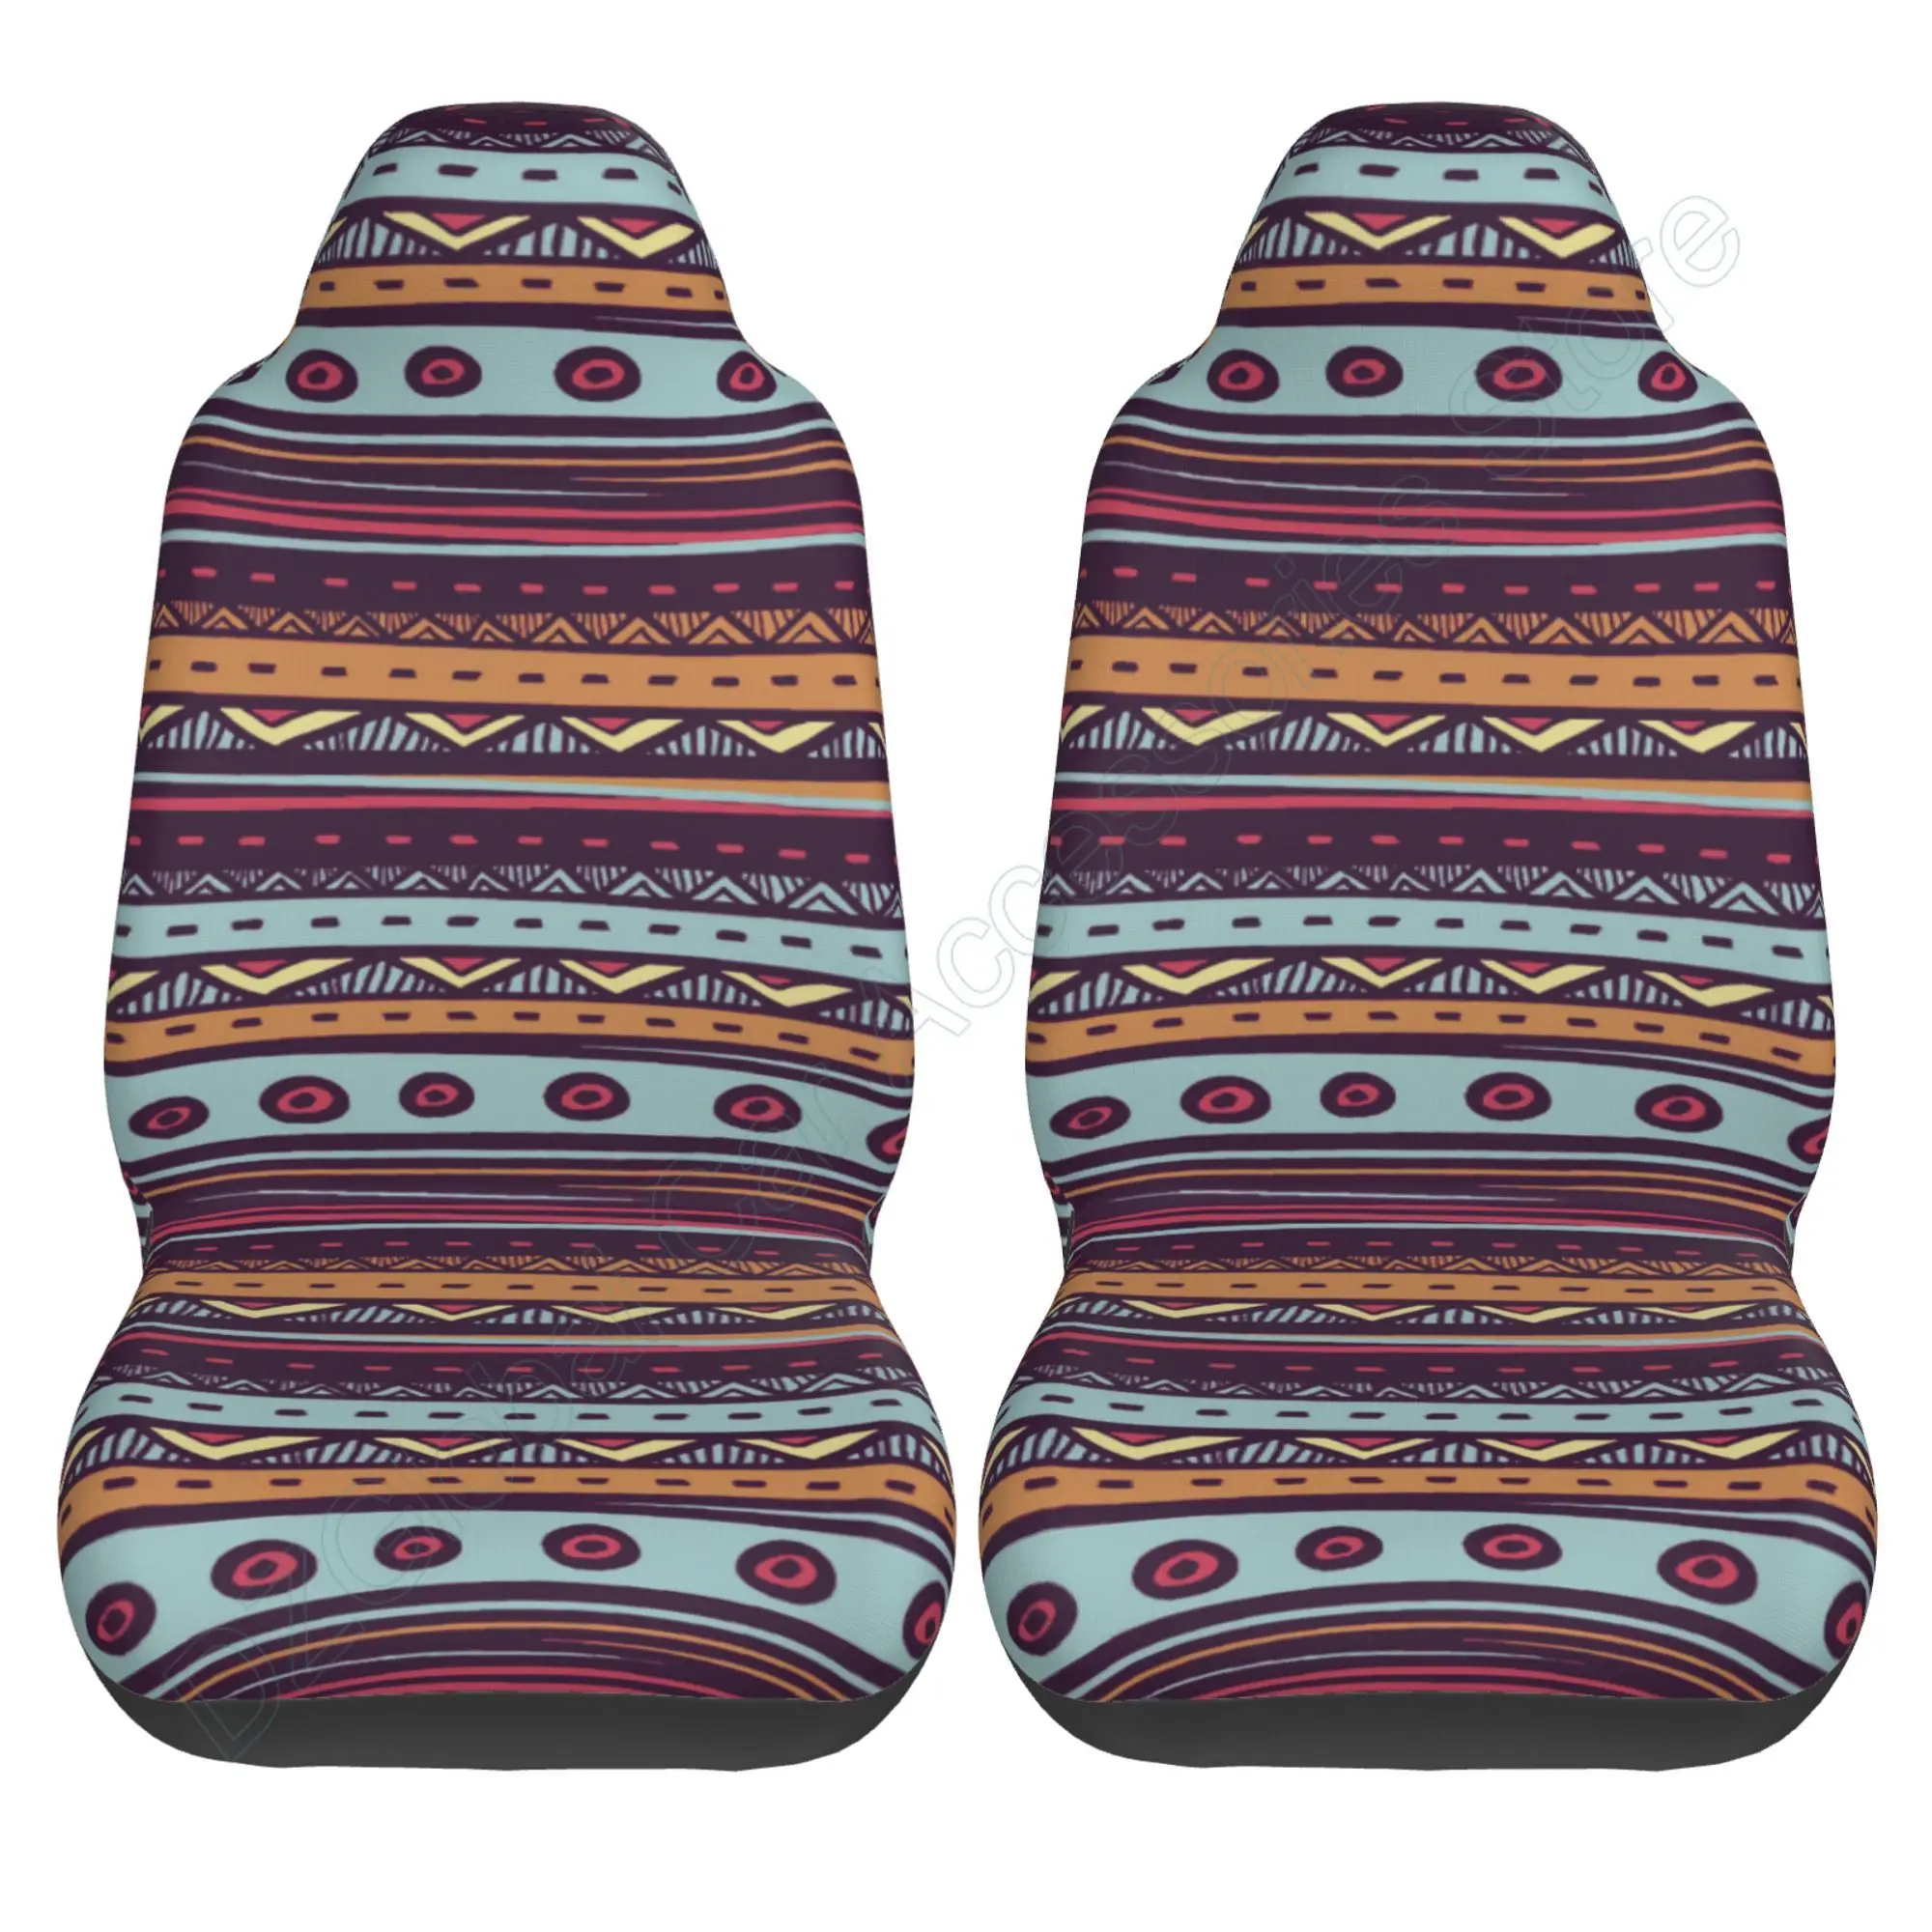 Hippie Blanket Car Seat Covers Full Set Front Rear Bench Seat Protectors